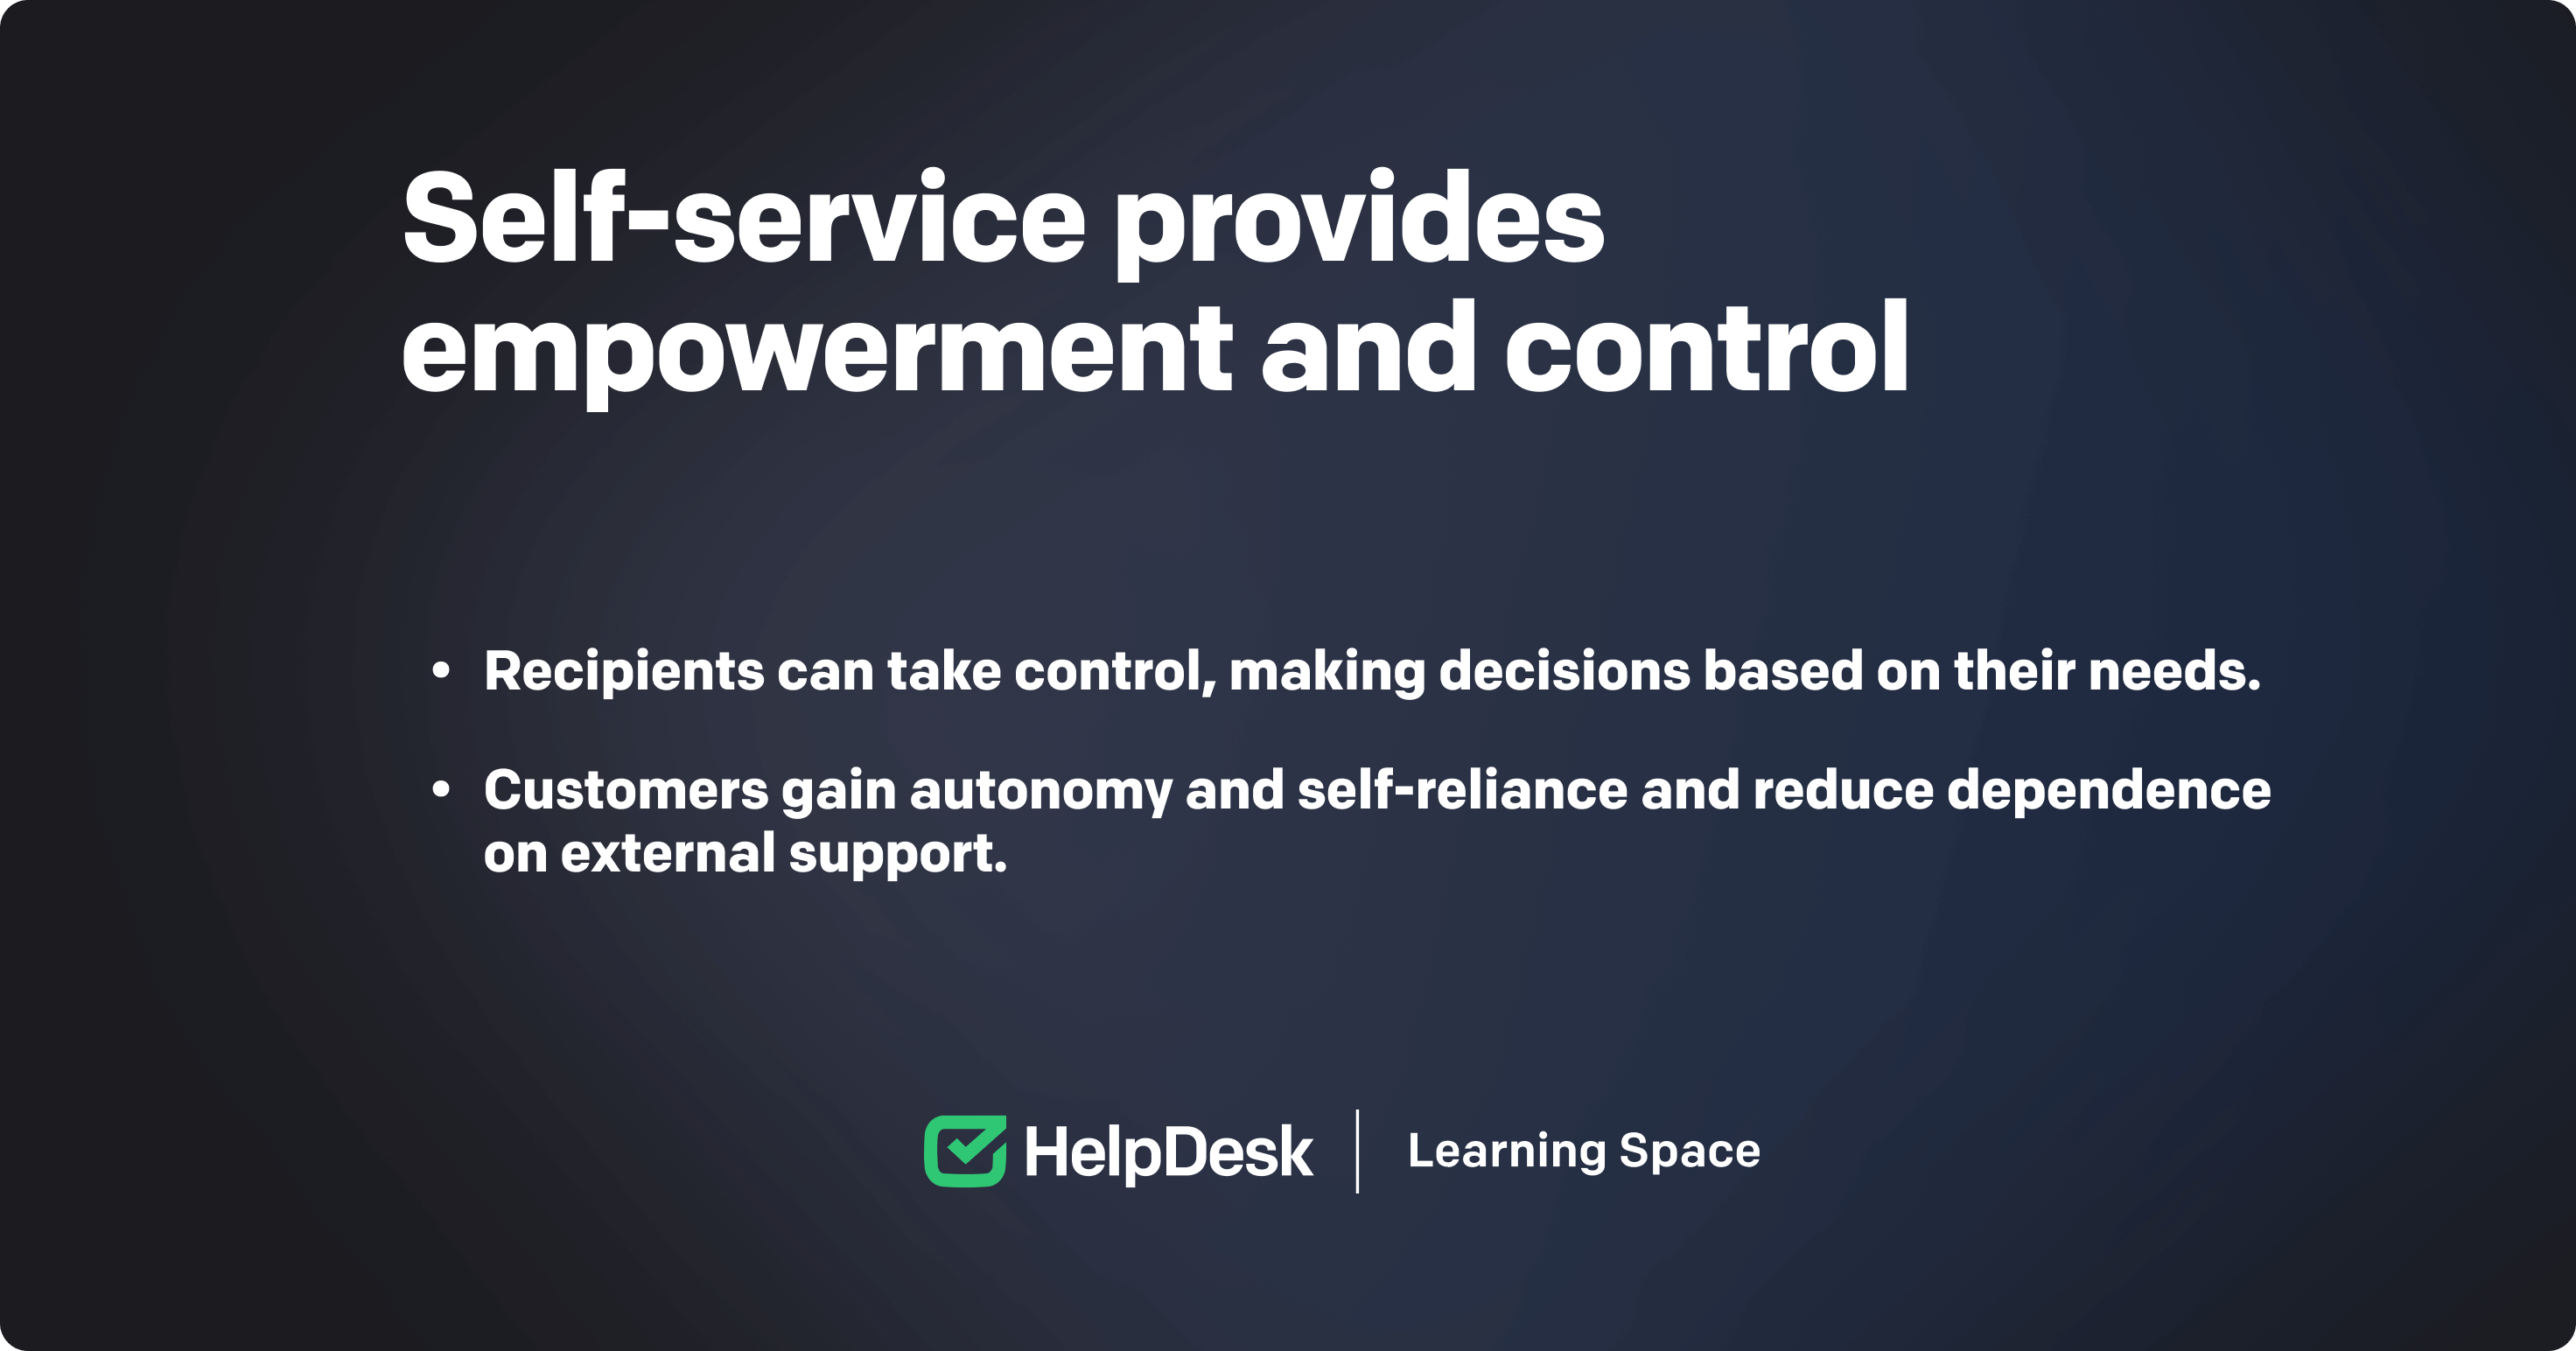 Self-service benefits for customers: empowerment and control